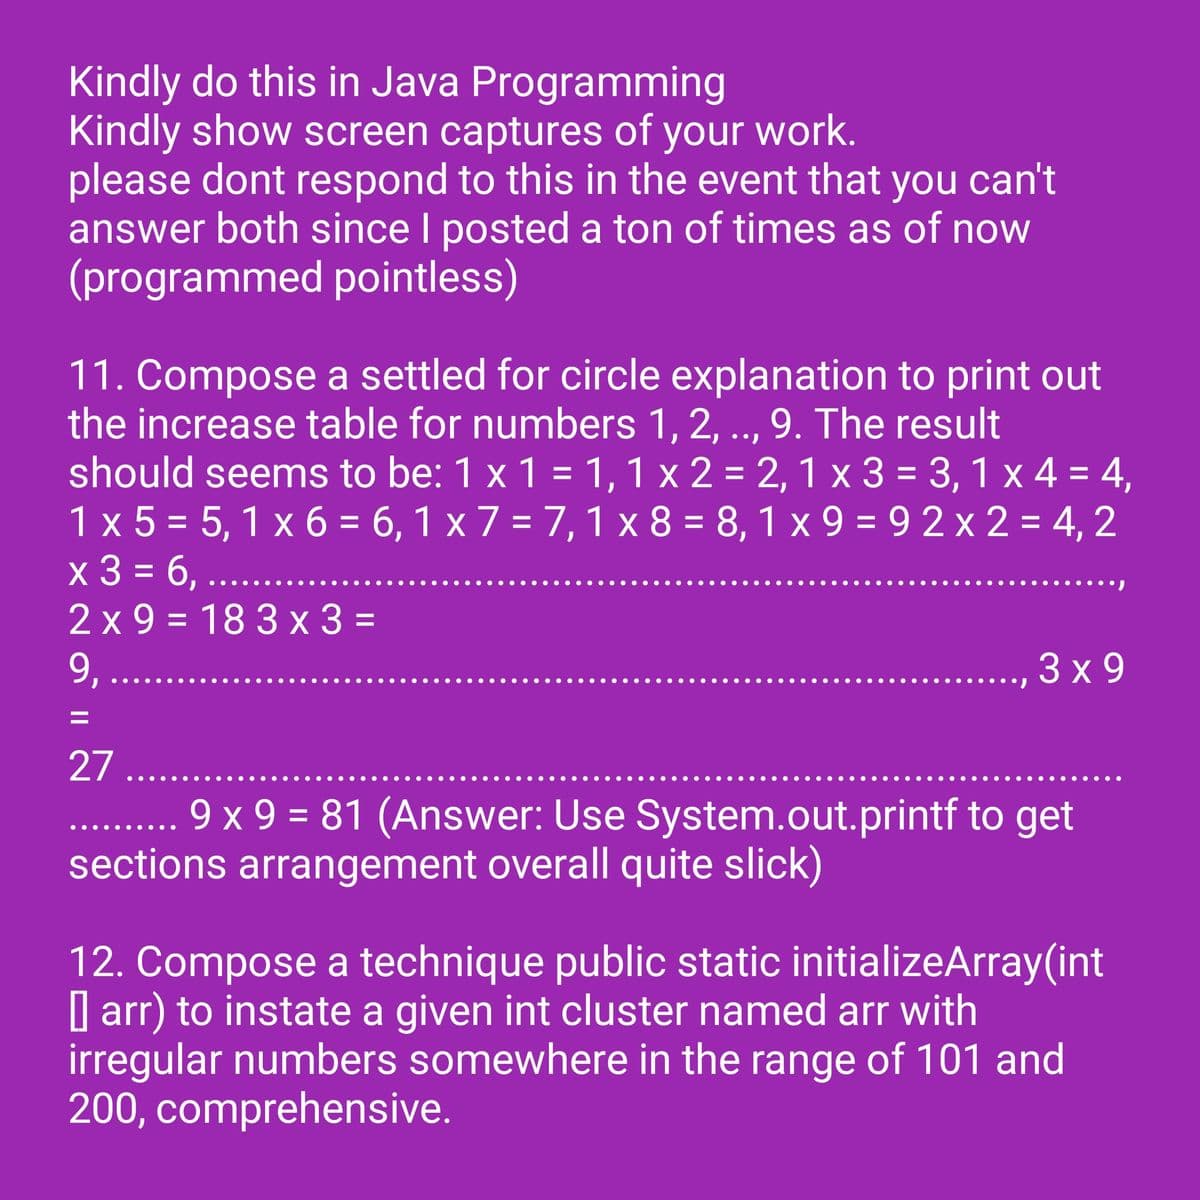 Kindly do this in Java Programming
Kindly show screen captures of your work.
please dont respond to this in the event that you can't
answer both since I posted a ton of times as of now
(programmed pointless)
11. Compose a settled for circle explanation to print out
the increase table for numbers 1, 2, .., 9. The result
should seems to be: 1 x 1 = 1, 1 x 2 = 2, 1 x 3 = 3,1 x 4 = 4,
1 x 5 = 5,1x6 = 6,1 x 7 = 7,1 x 8 = 8,1x9=92x2= 4,2
x 3 = 6,..
2x9=183 x 3 =
9, .....
3x9
27 ......
9 x 9 = 81 (Answer: Use System.out.printf to get
sections arrangement overall quite slick)
12. Compose a technique public static initializeArray (int
arr) to instate a given int cluster named arr with
irregular numbers somewhere in the range of 101 and
200, comprehensive.